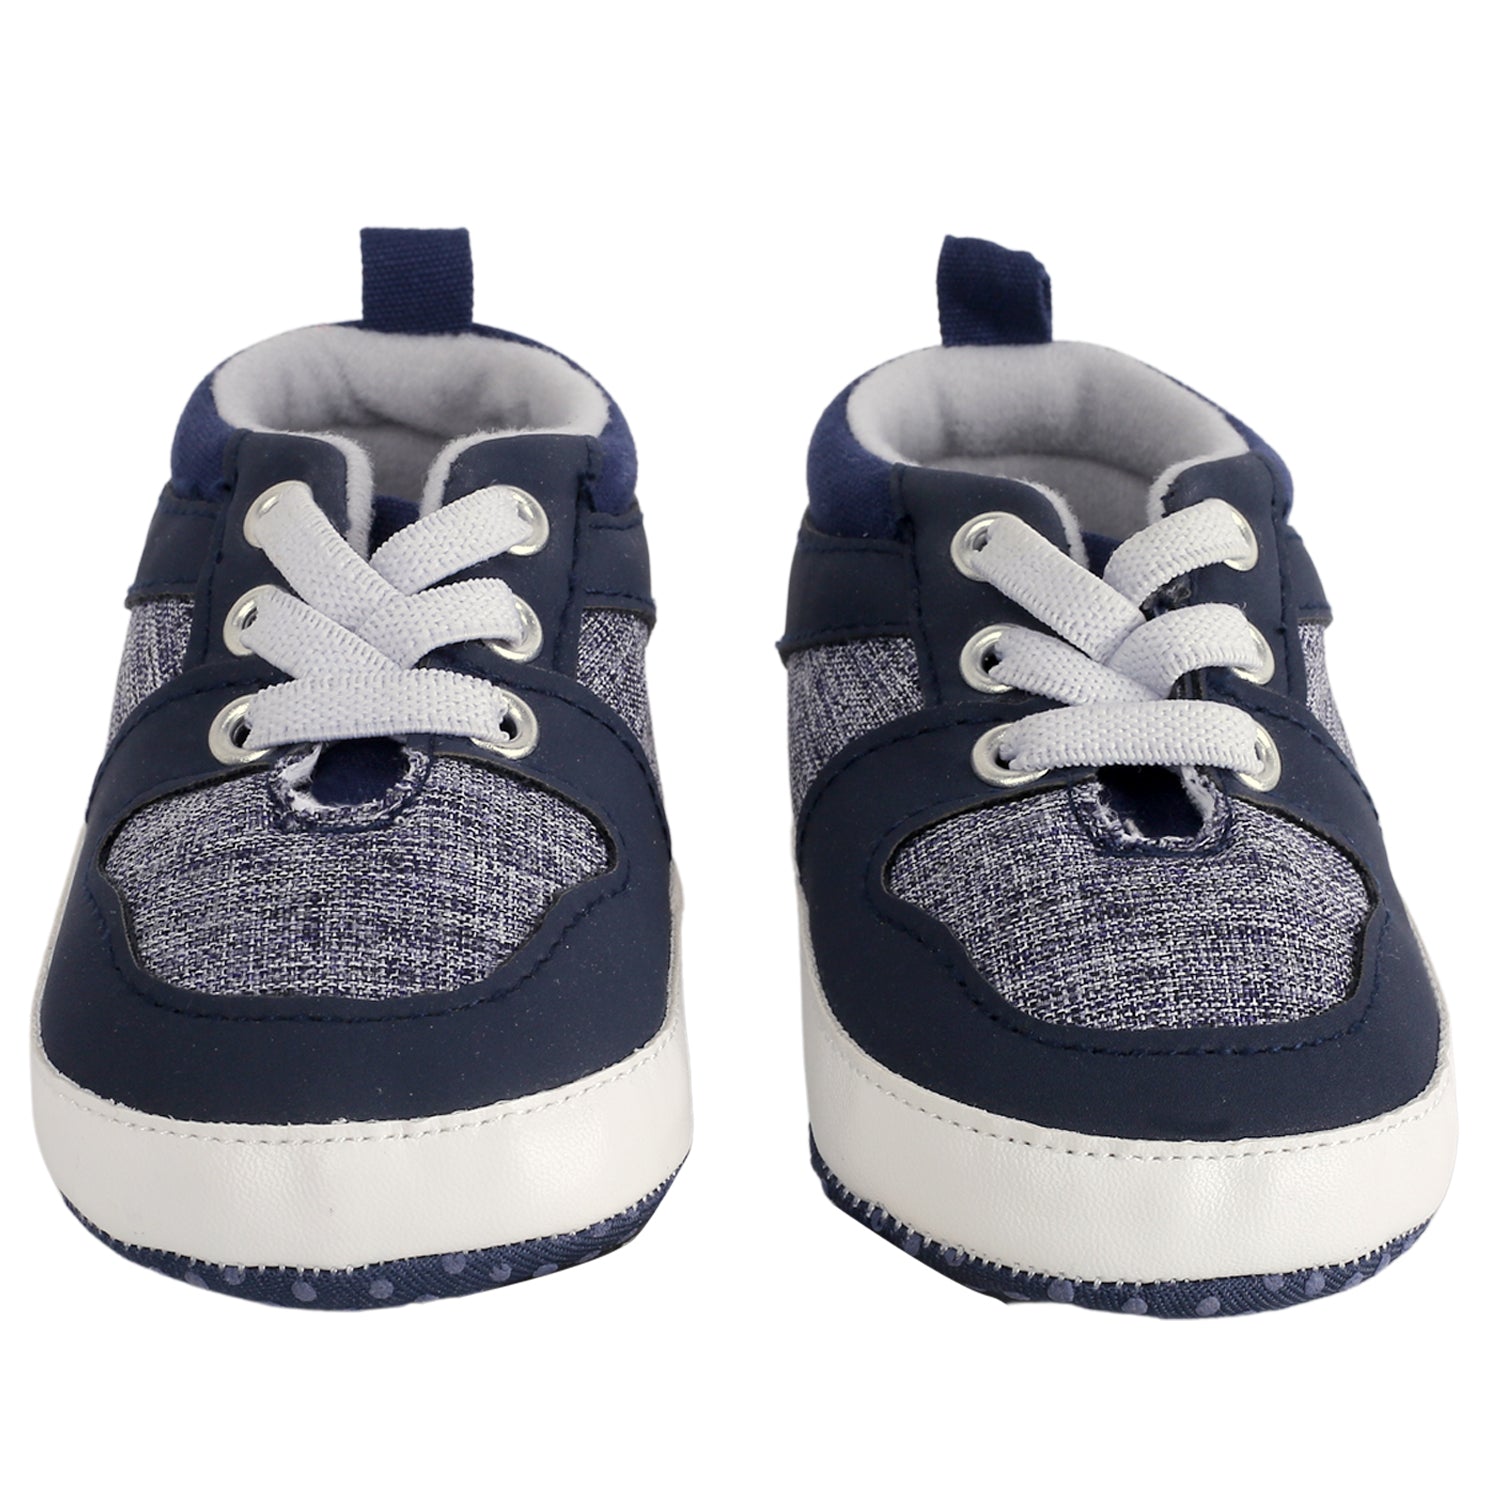 Casual Blue Lace Up Booties - Baby Moo